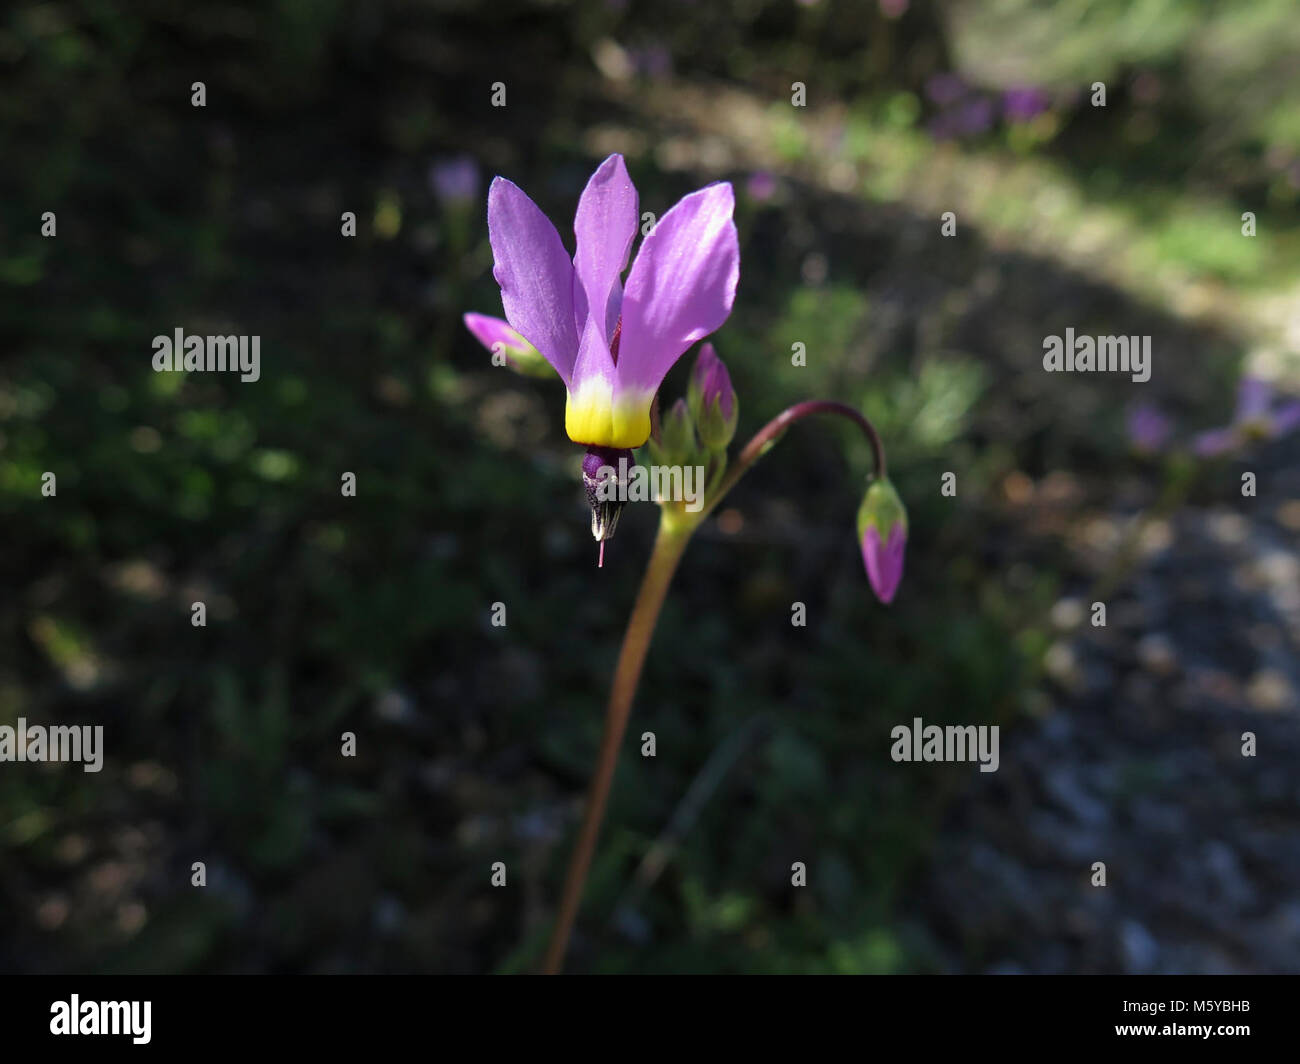 Shooting Star. Scientific name: Dodecatheon clevelandii Stock Photo